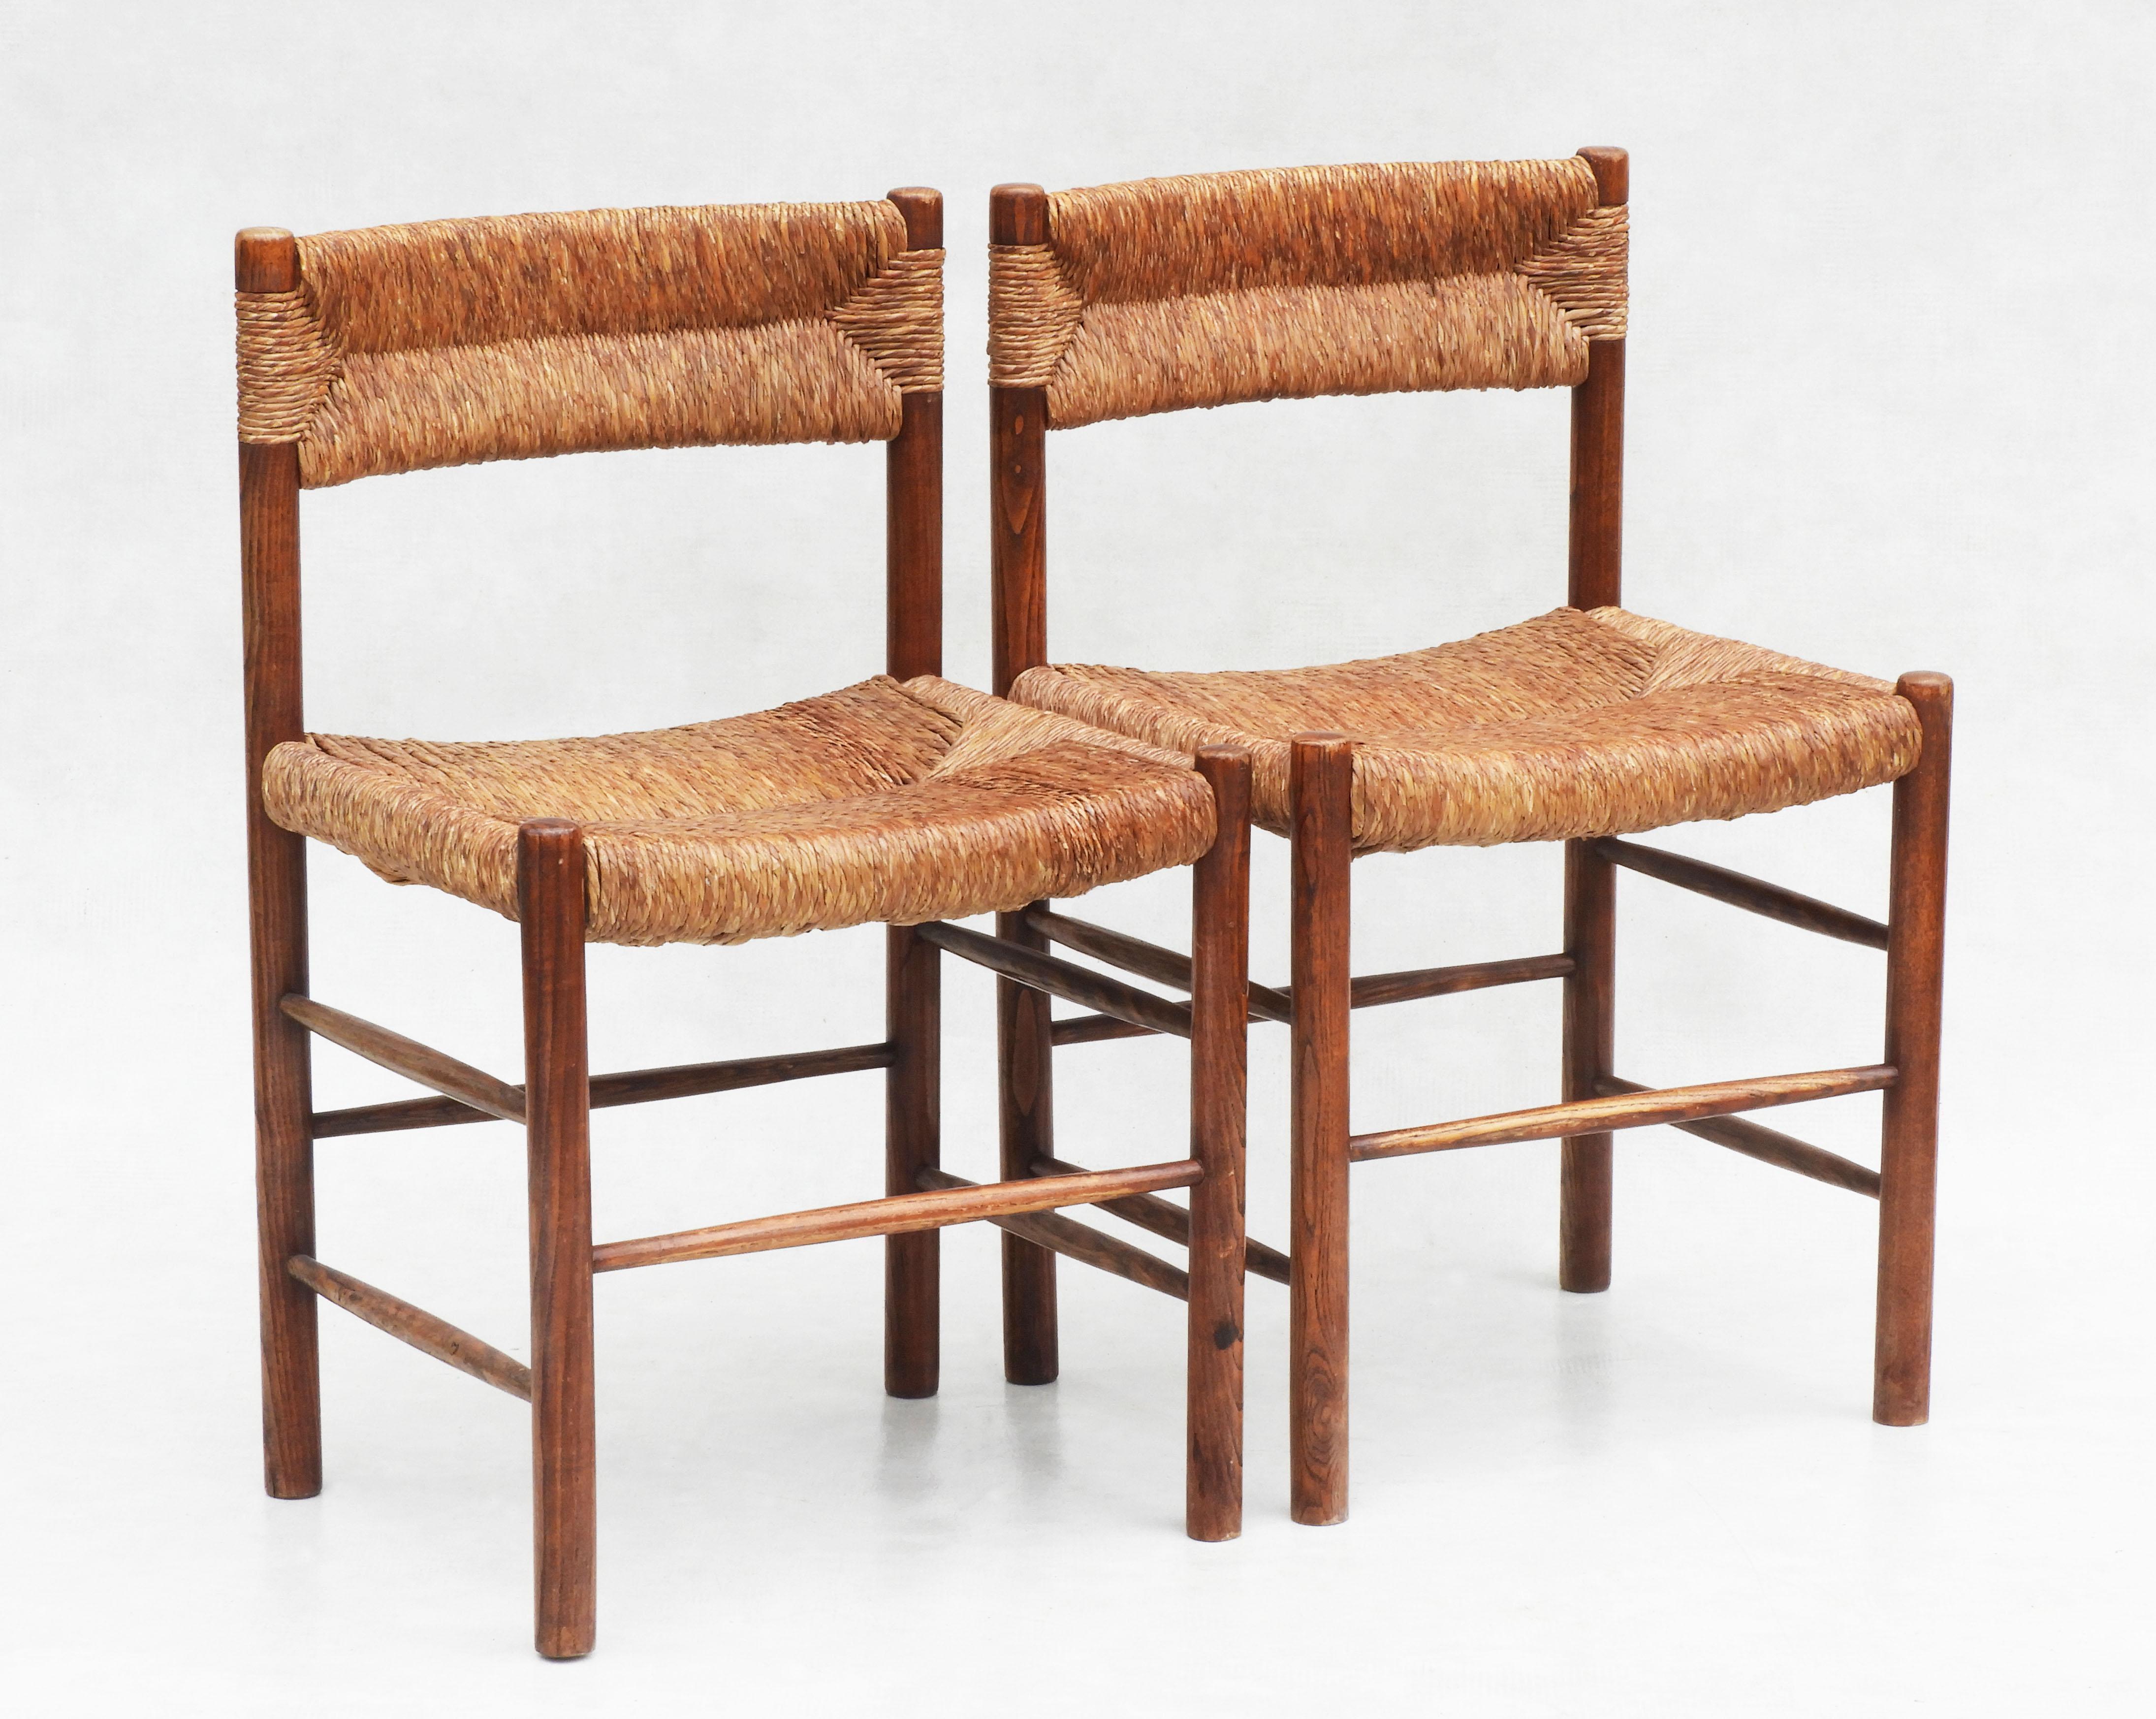 French Provincial Pair of Dordogne Chairs by Charlotte Perriande for Robert Sentou France, 1960s